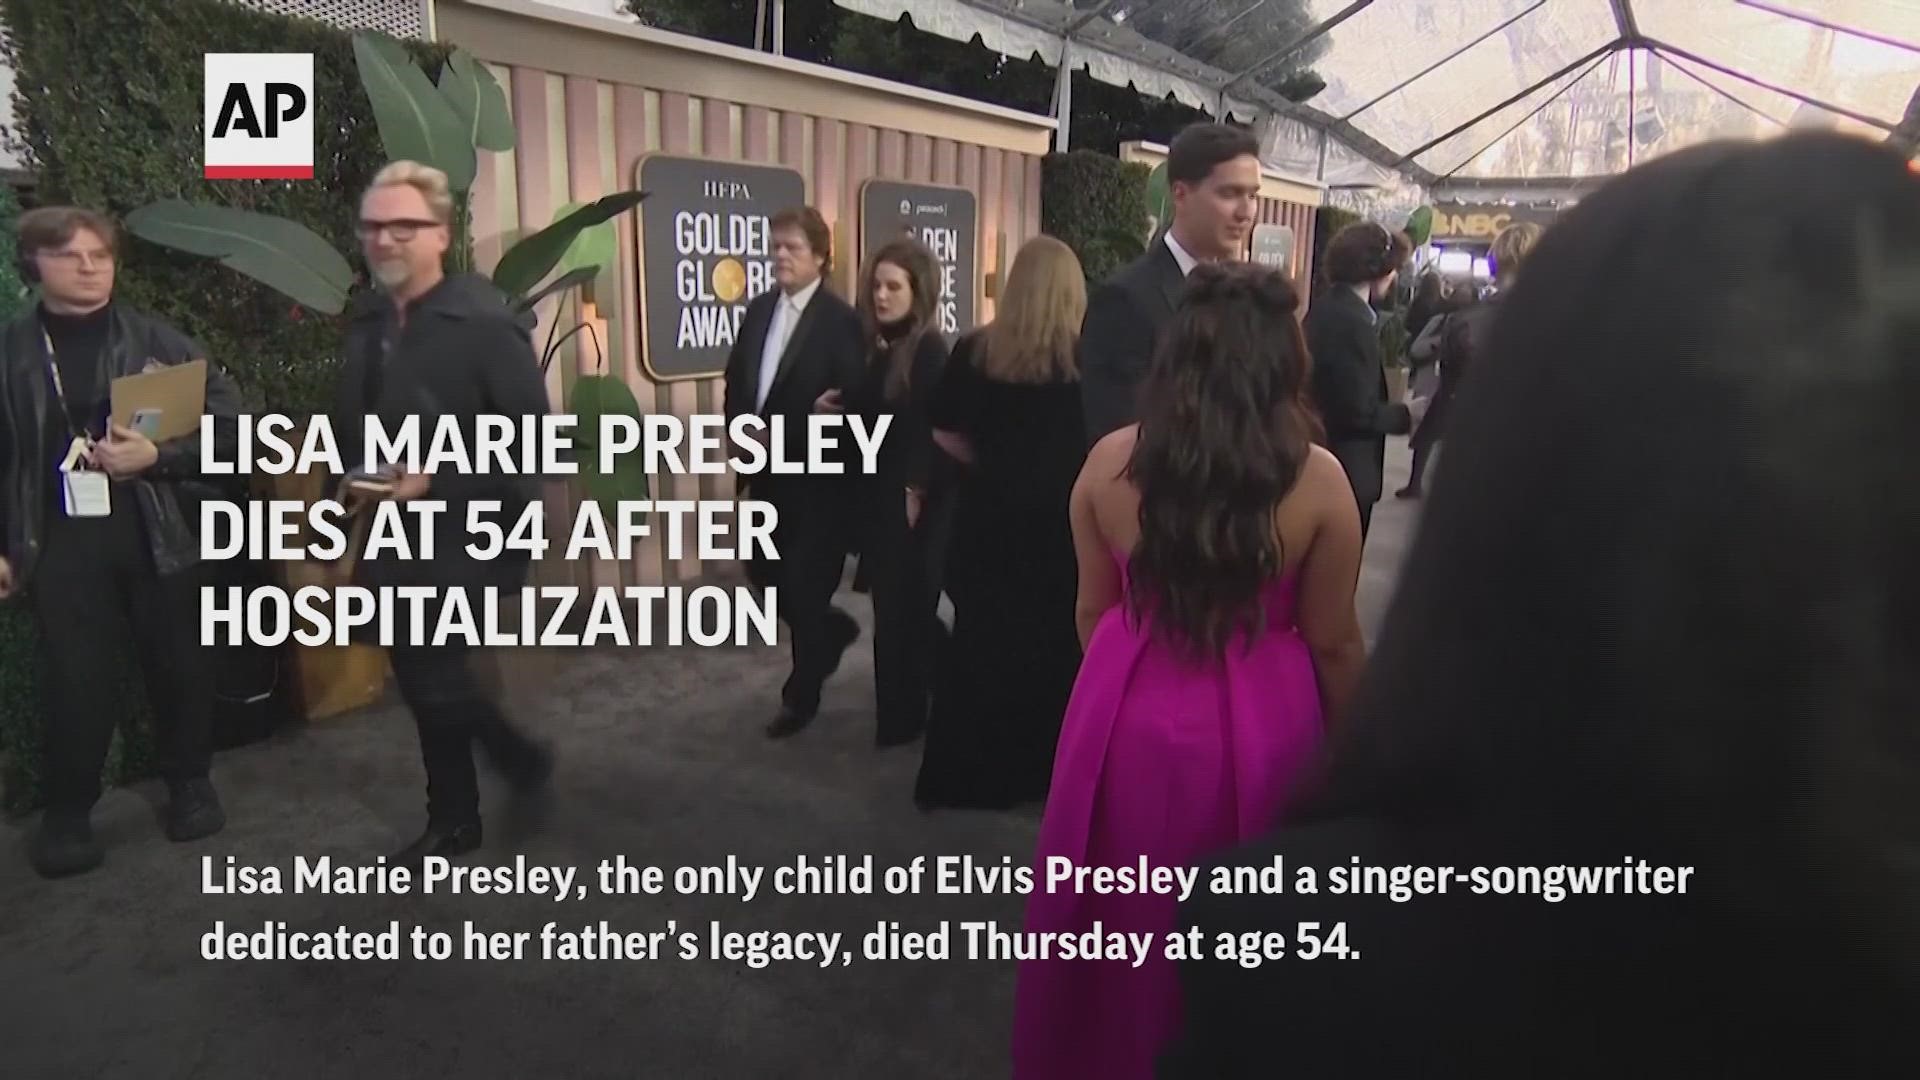 Presley’s death was confirmed by her mother, Priscilla, who called her daughter "the most passionate, strong and loving woman I have ever known.”